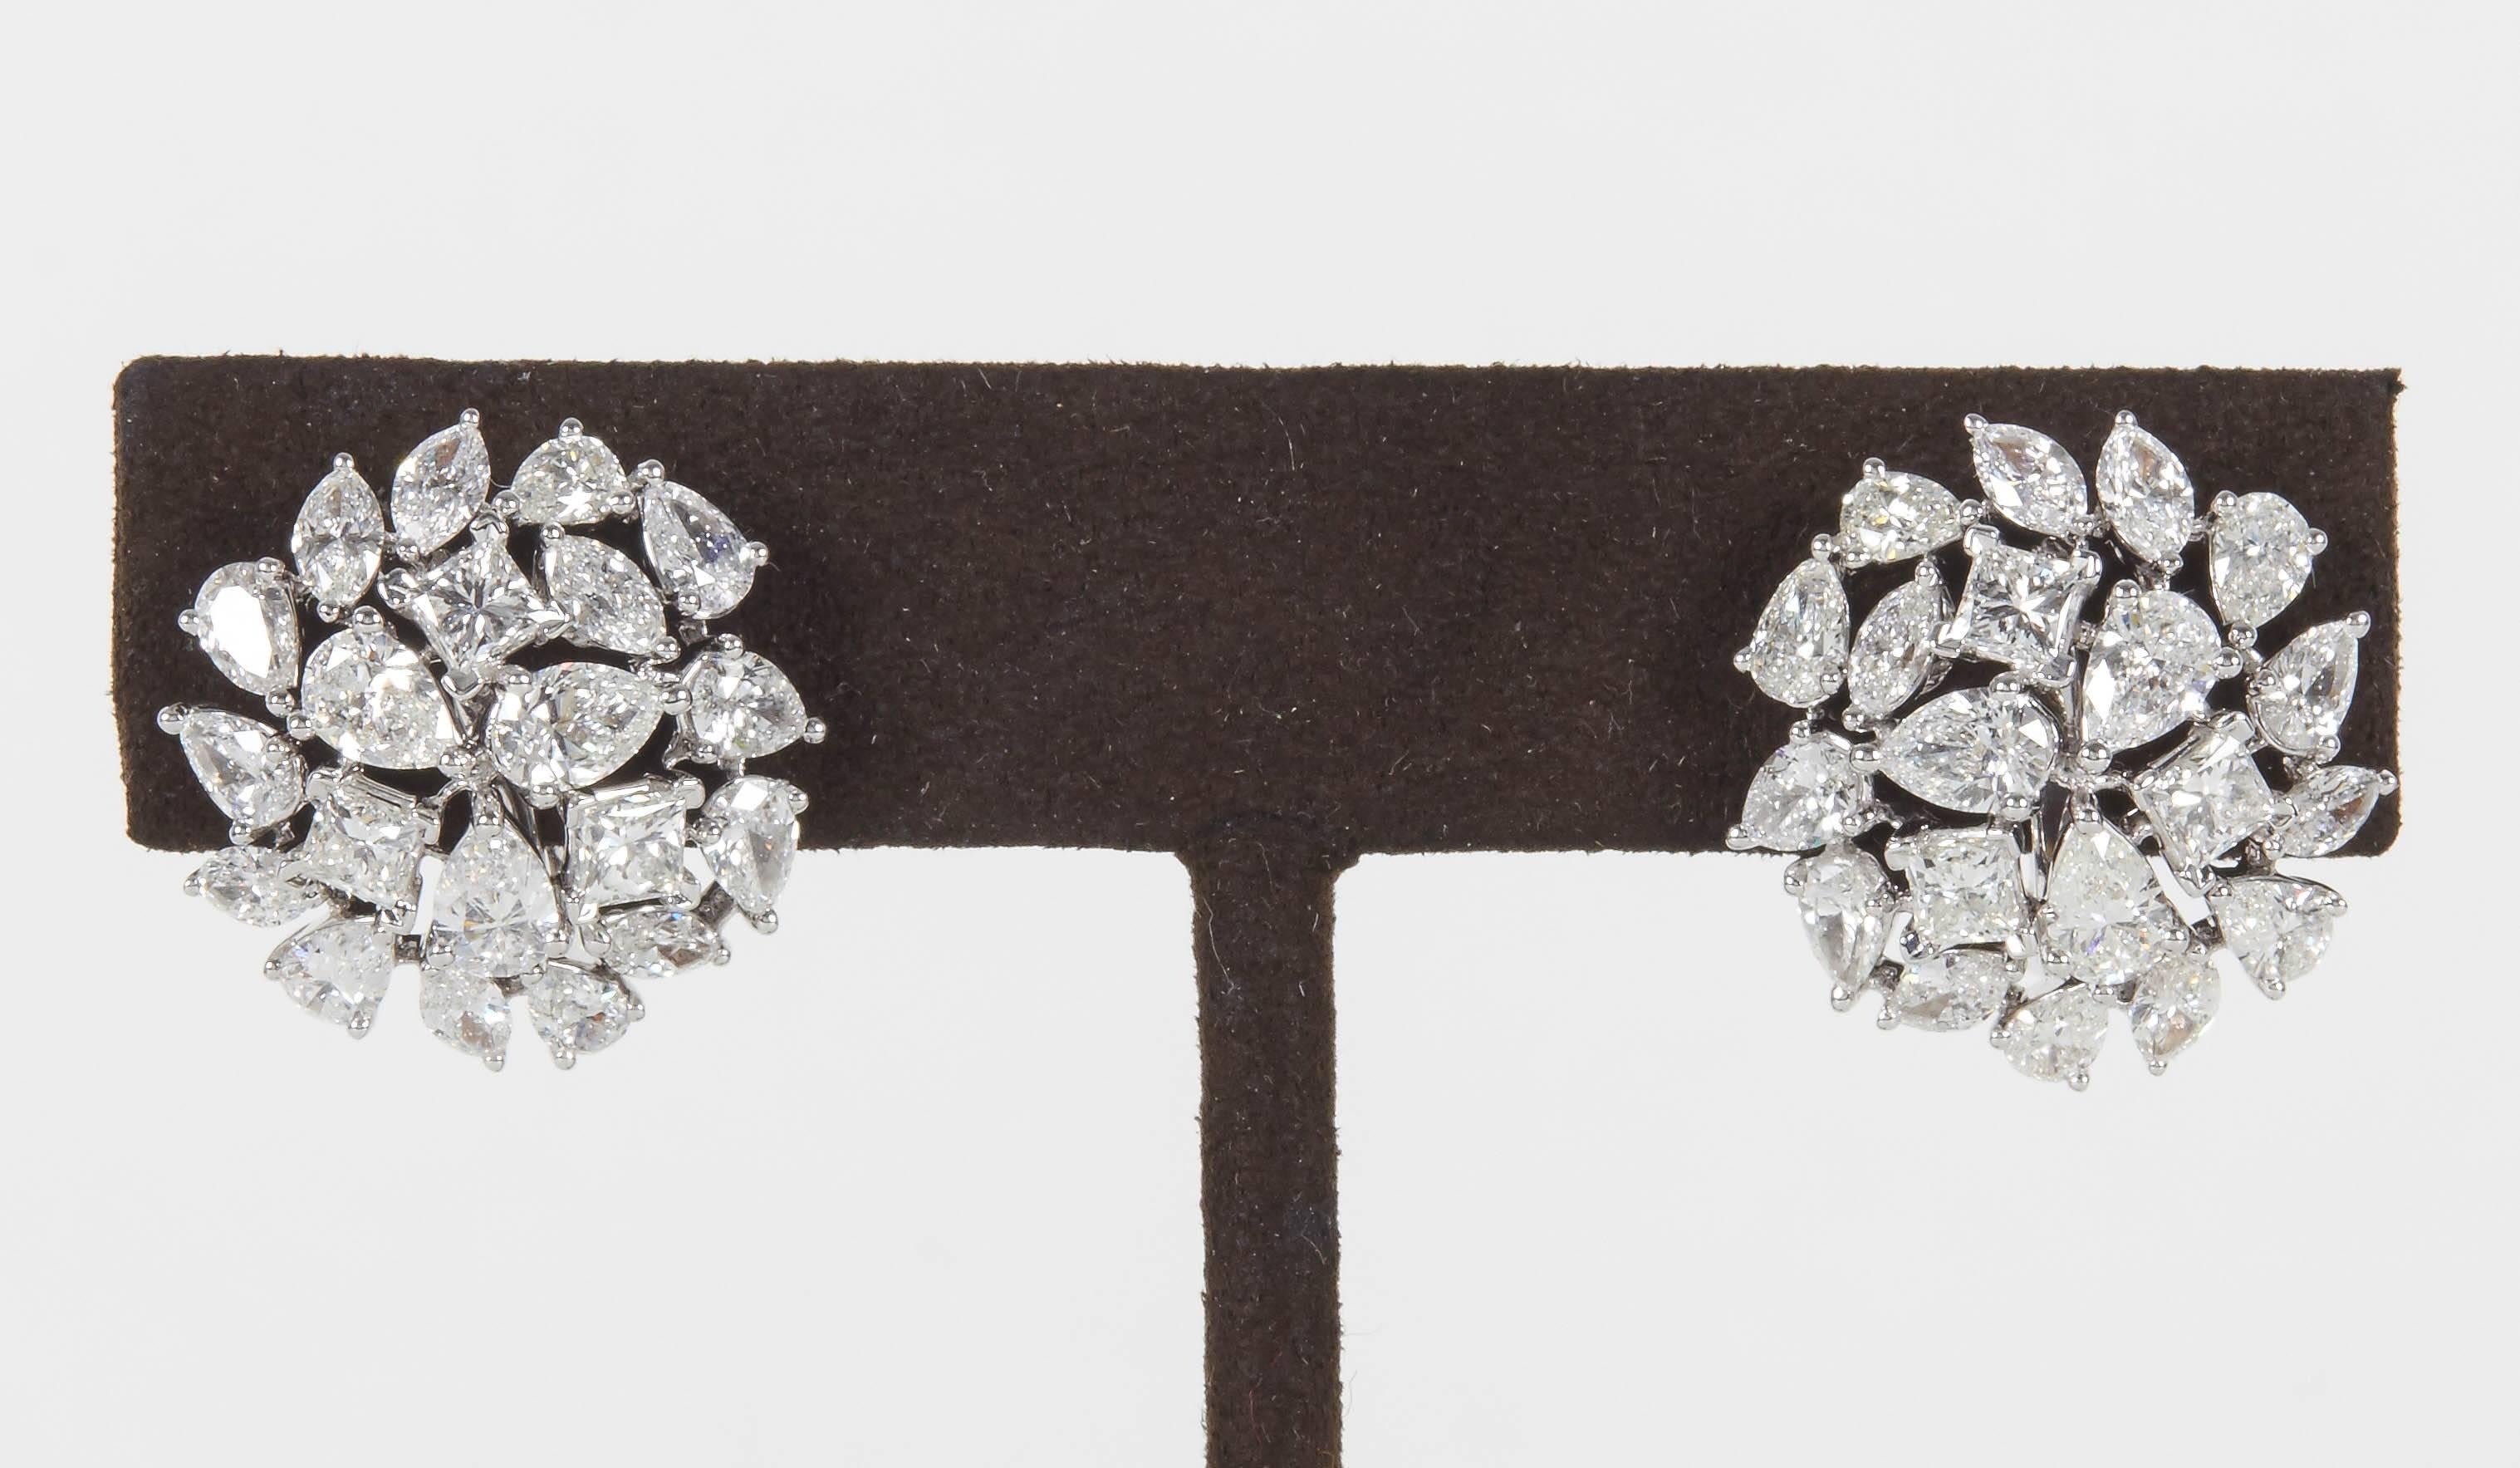 

A gorgeous pair of earrings to add to any collection!

6.25 carats of F/G color VS clarity diamonds. This earring features pear, marquise and princess cut diamonds.

Approx .72 inches wide and .75 inches tall. 

Set in 18k white gold. 